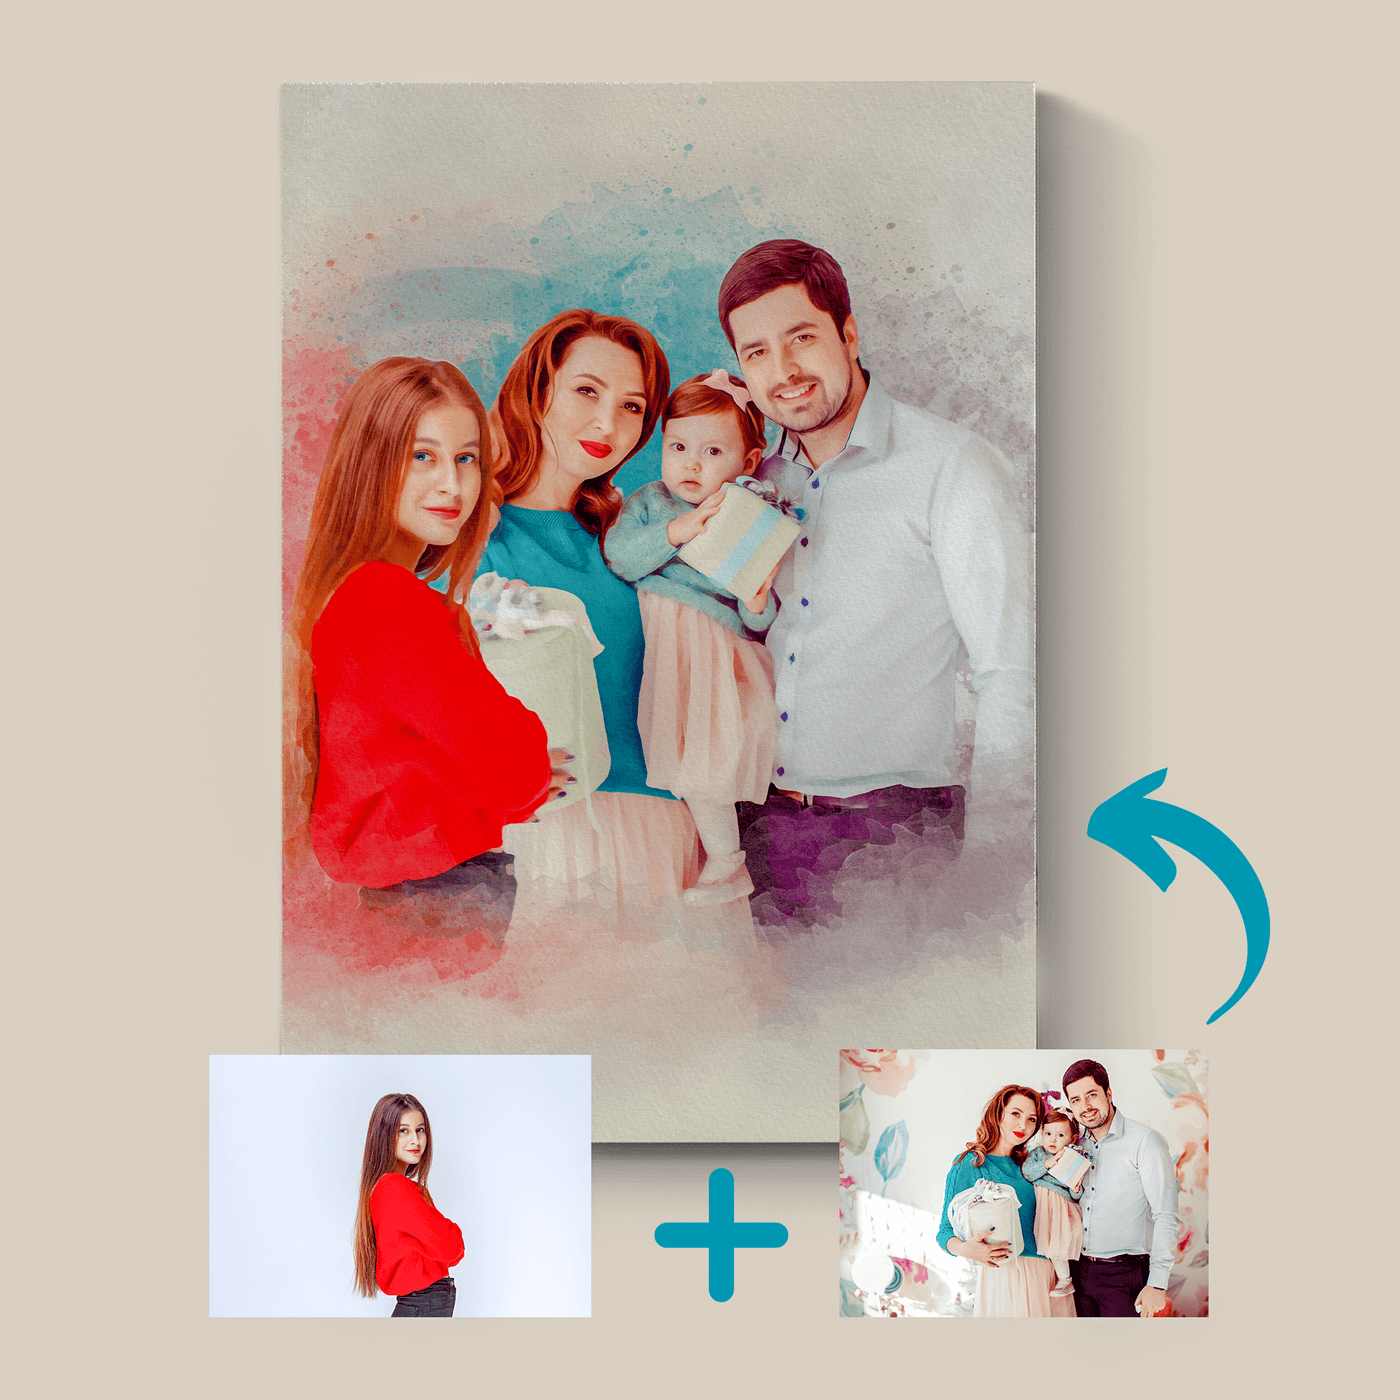 combine photos of a lovely family and the woman's sister, showcasing an amazing before-and-after transformation